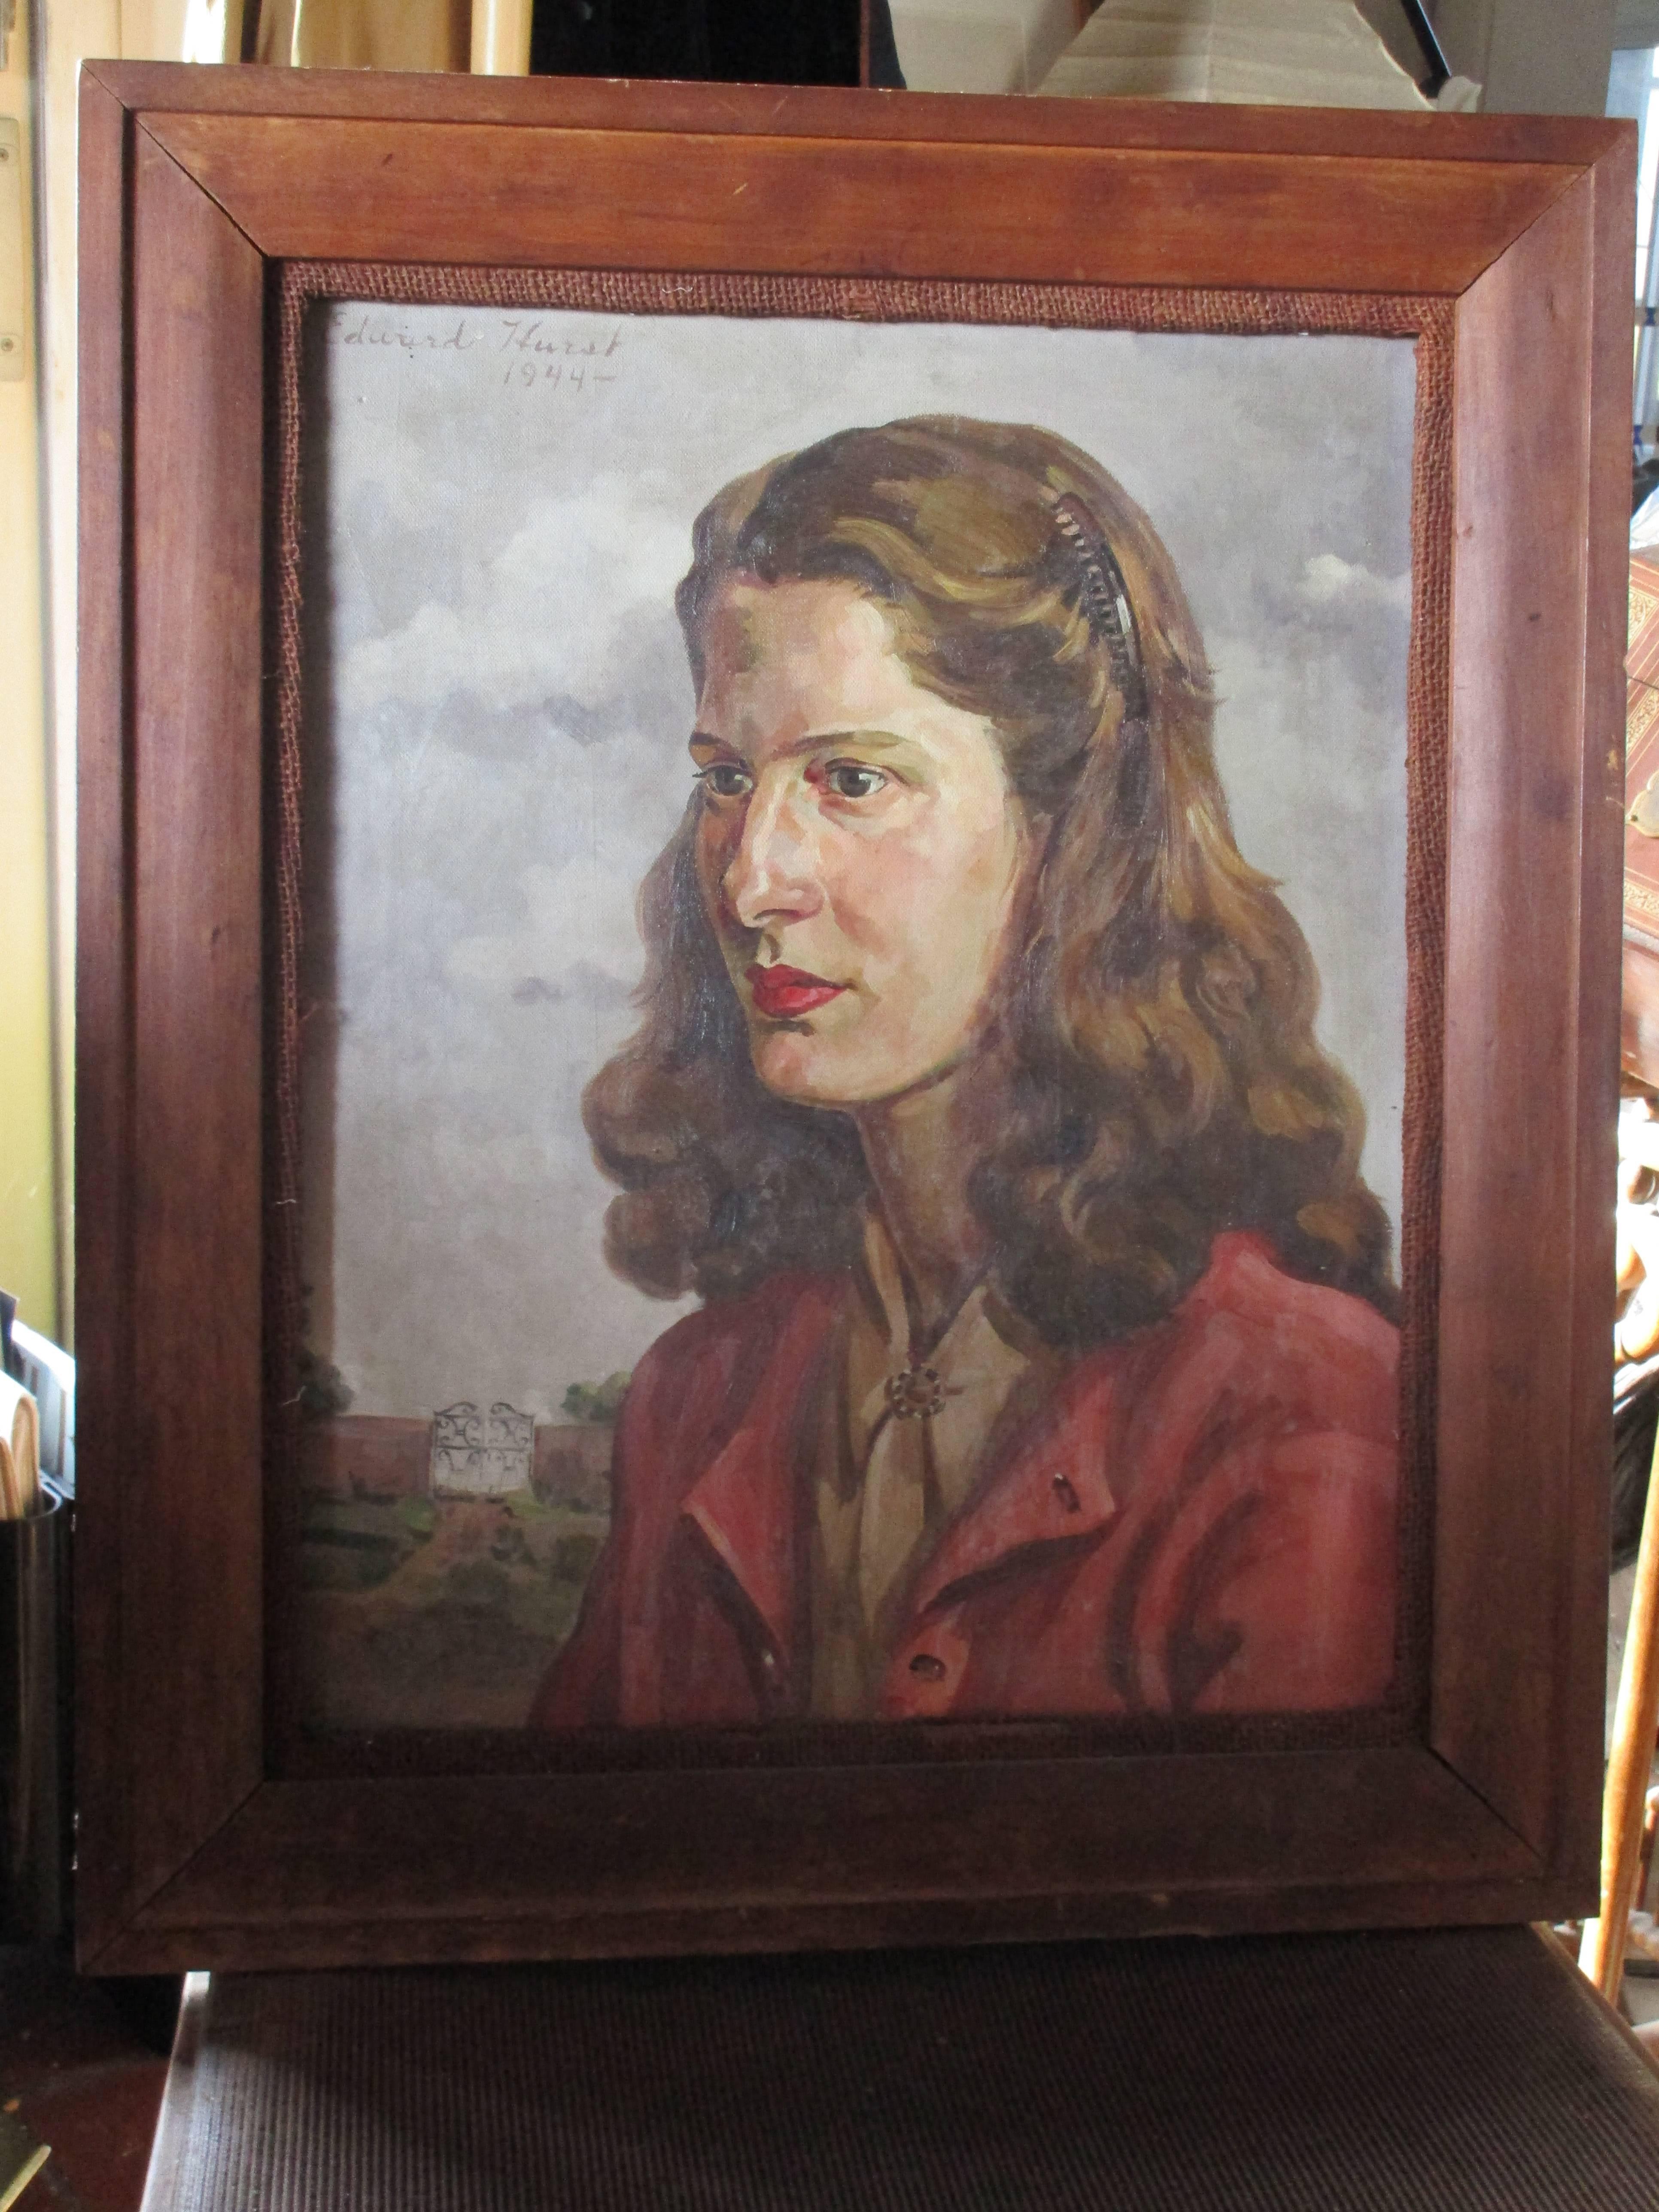 Oil on canvas 1944 portrait by Edward Hurst (1912-1972) listed American Society artist.
In a wood frame.